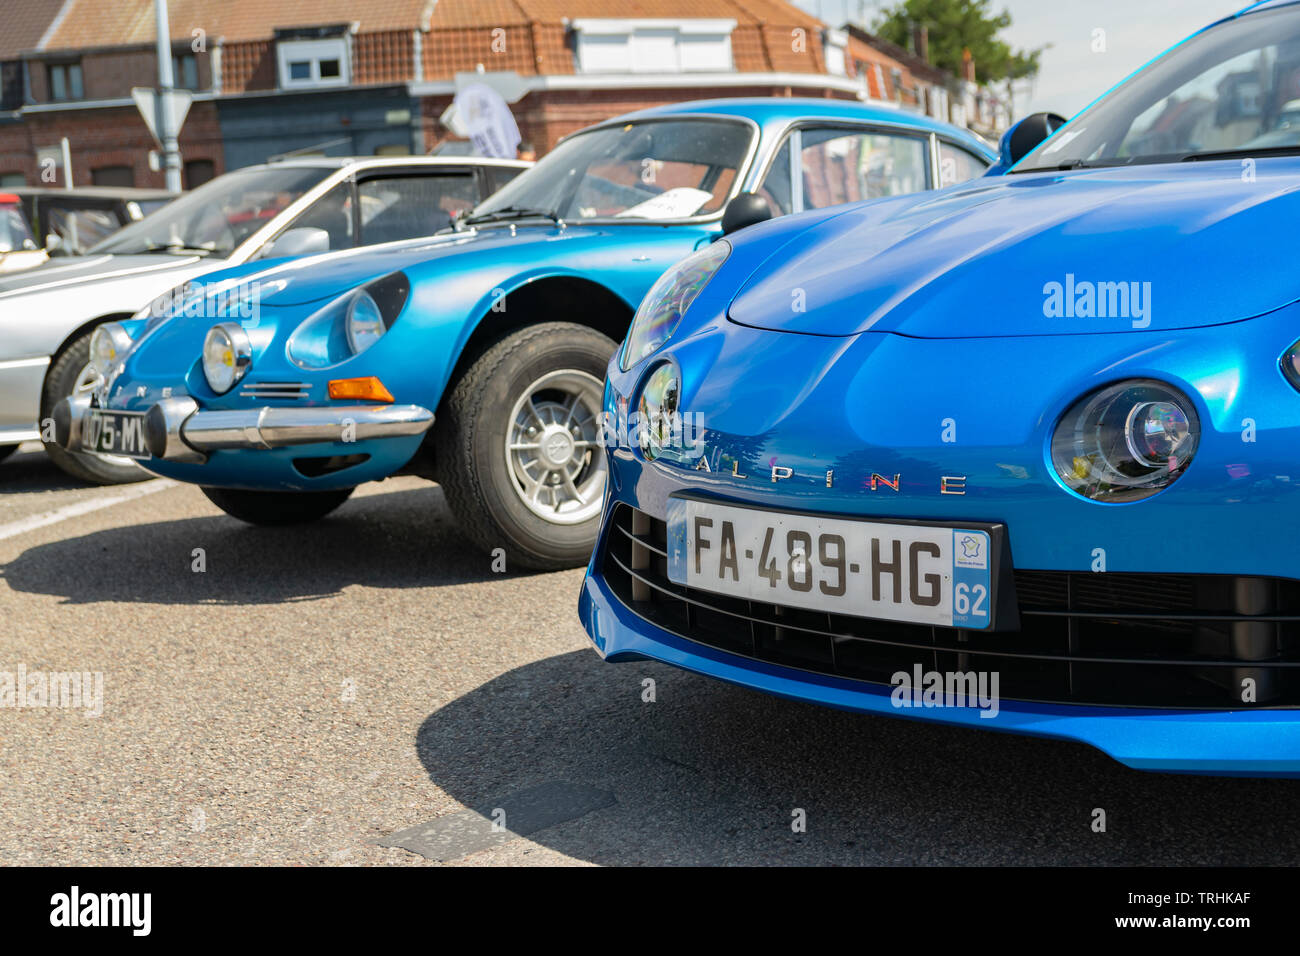 Wattrelos,FRANCE-June 02,2019: blue new and old  Renault Alpine A110,front view,car exhibited at the Renault Wattrelos Martinoire parking lot. Stock Photo